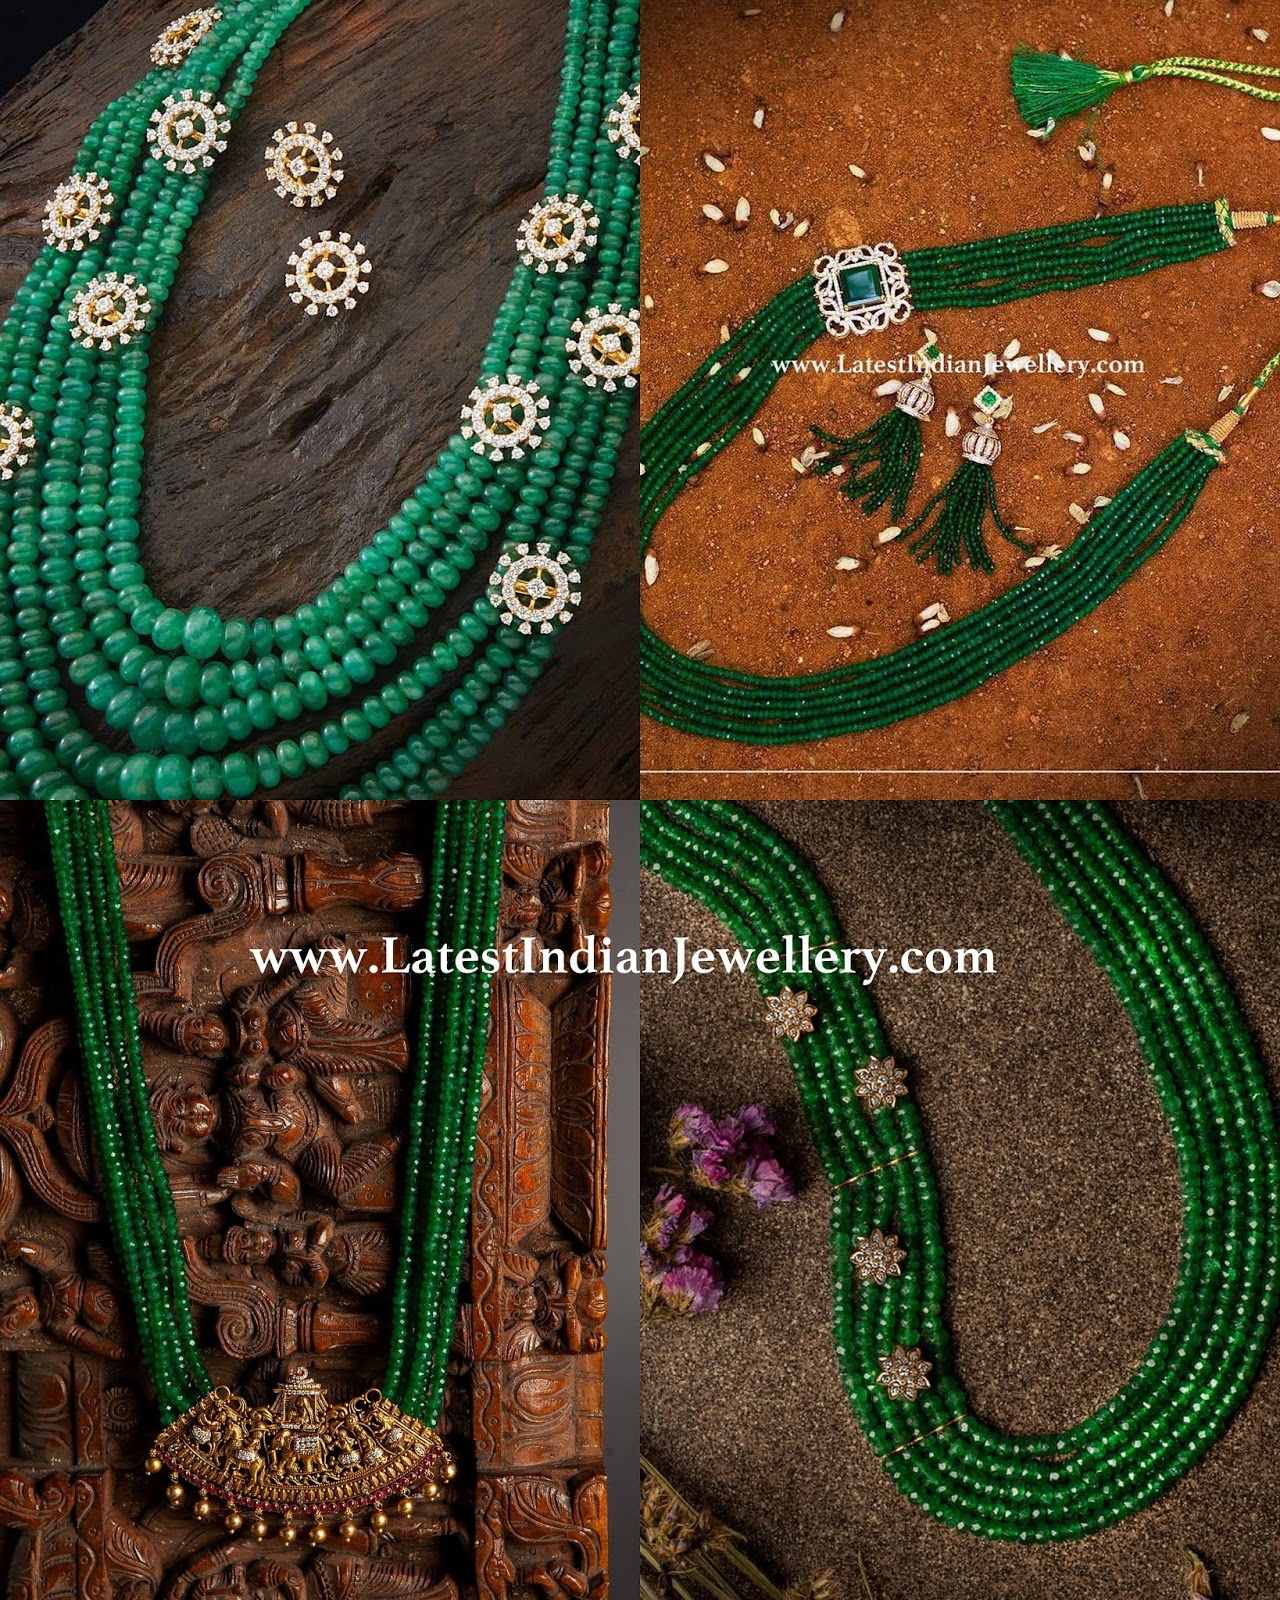 Beads Necklace With Floral CZ Motifs - Indian Jewellery Designs